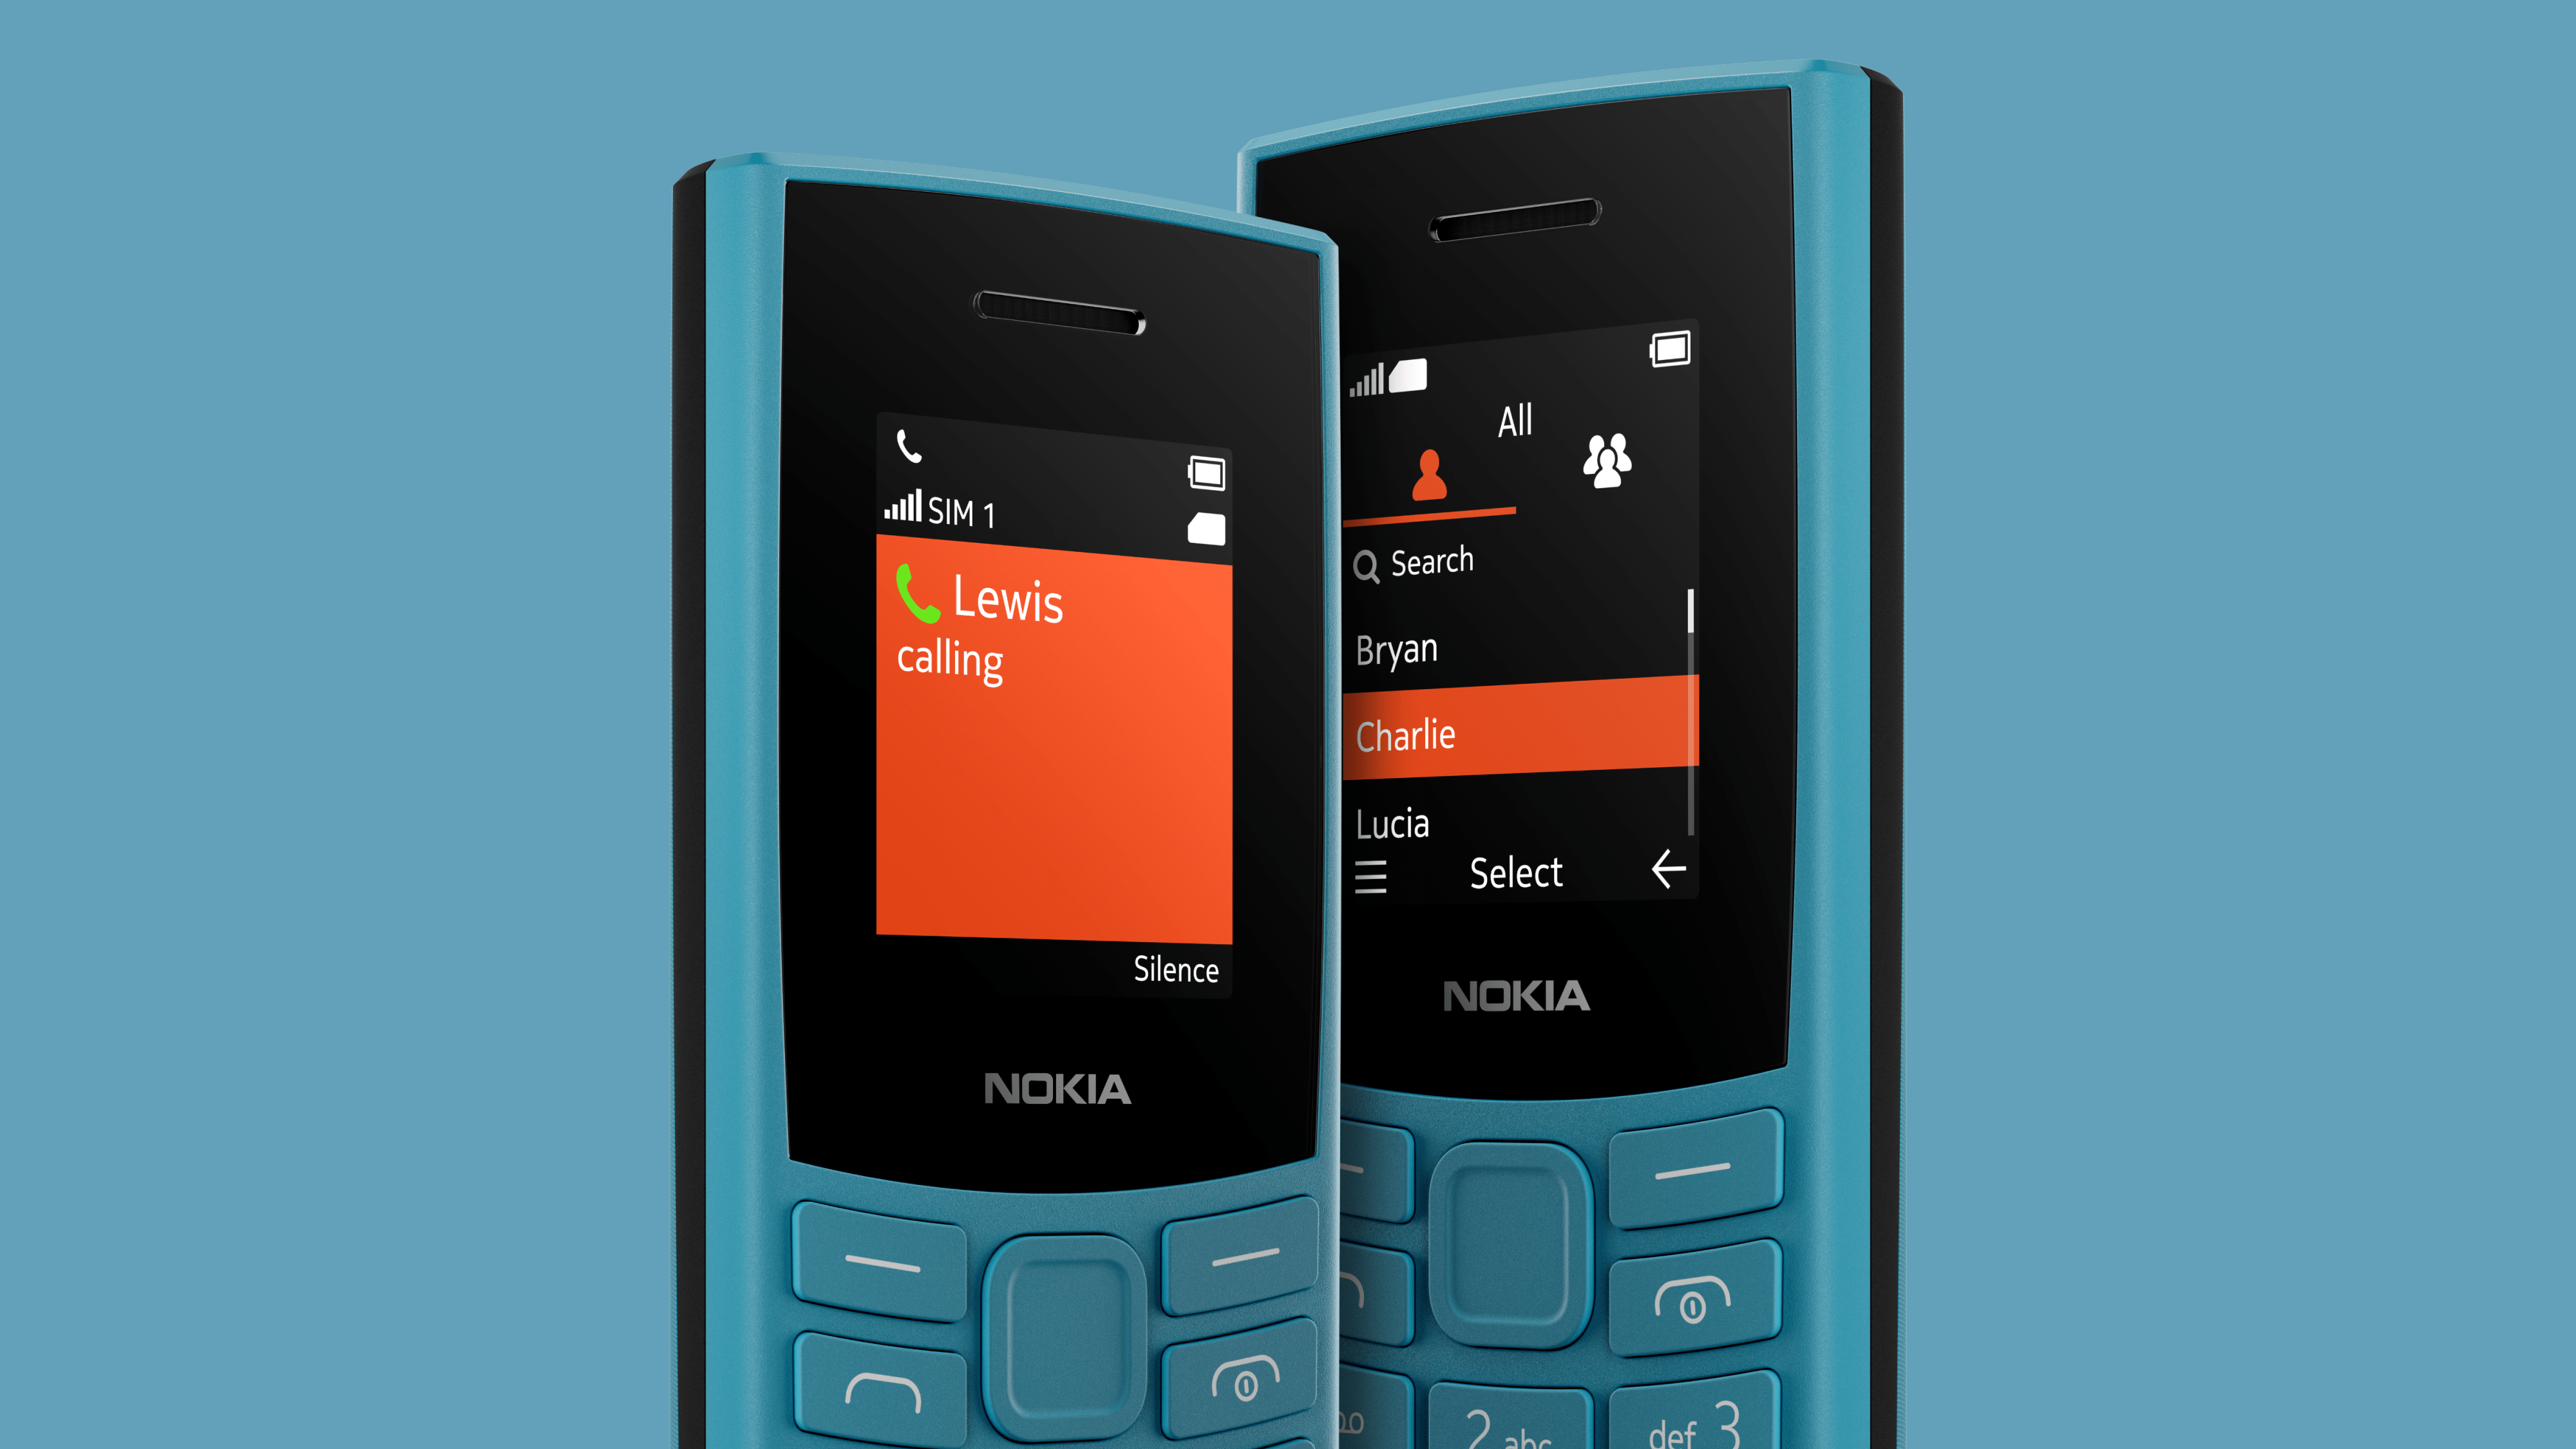 Nokia feature 105 with 4G internet phone